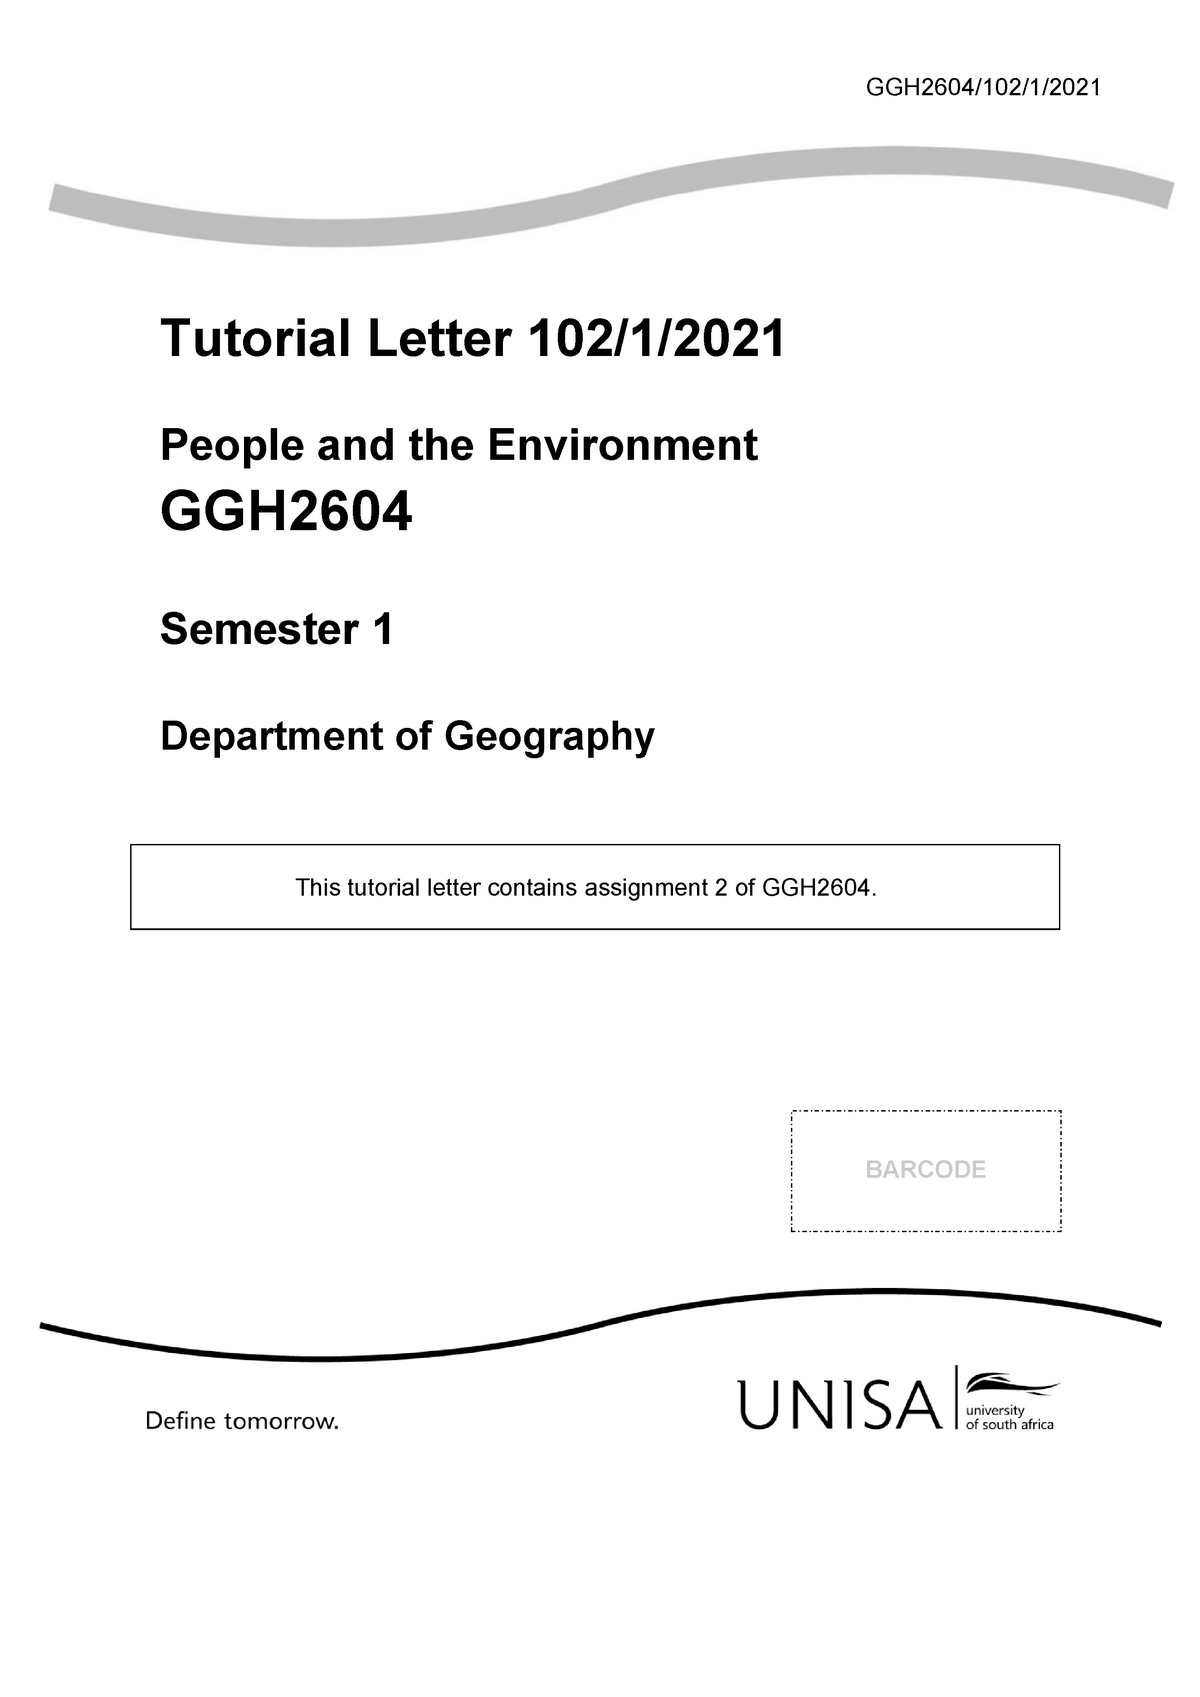 GGH2604 TL101 1 2021 Assignment 2 - GGH2604/102/1/ Tutorial Letter 102 ...